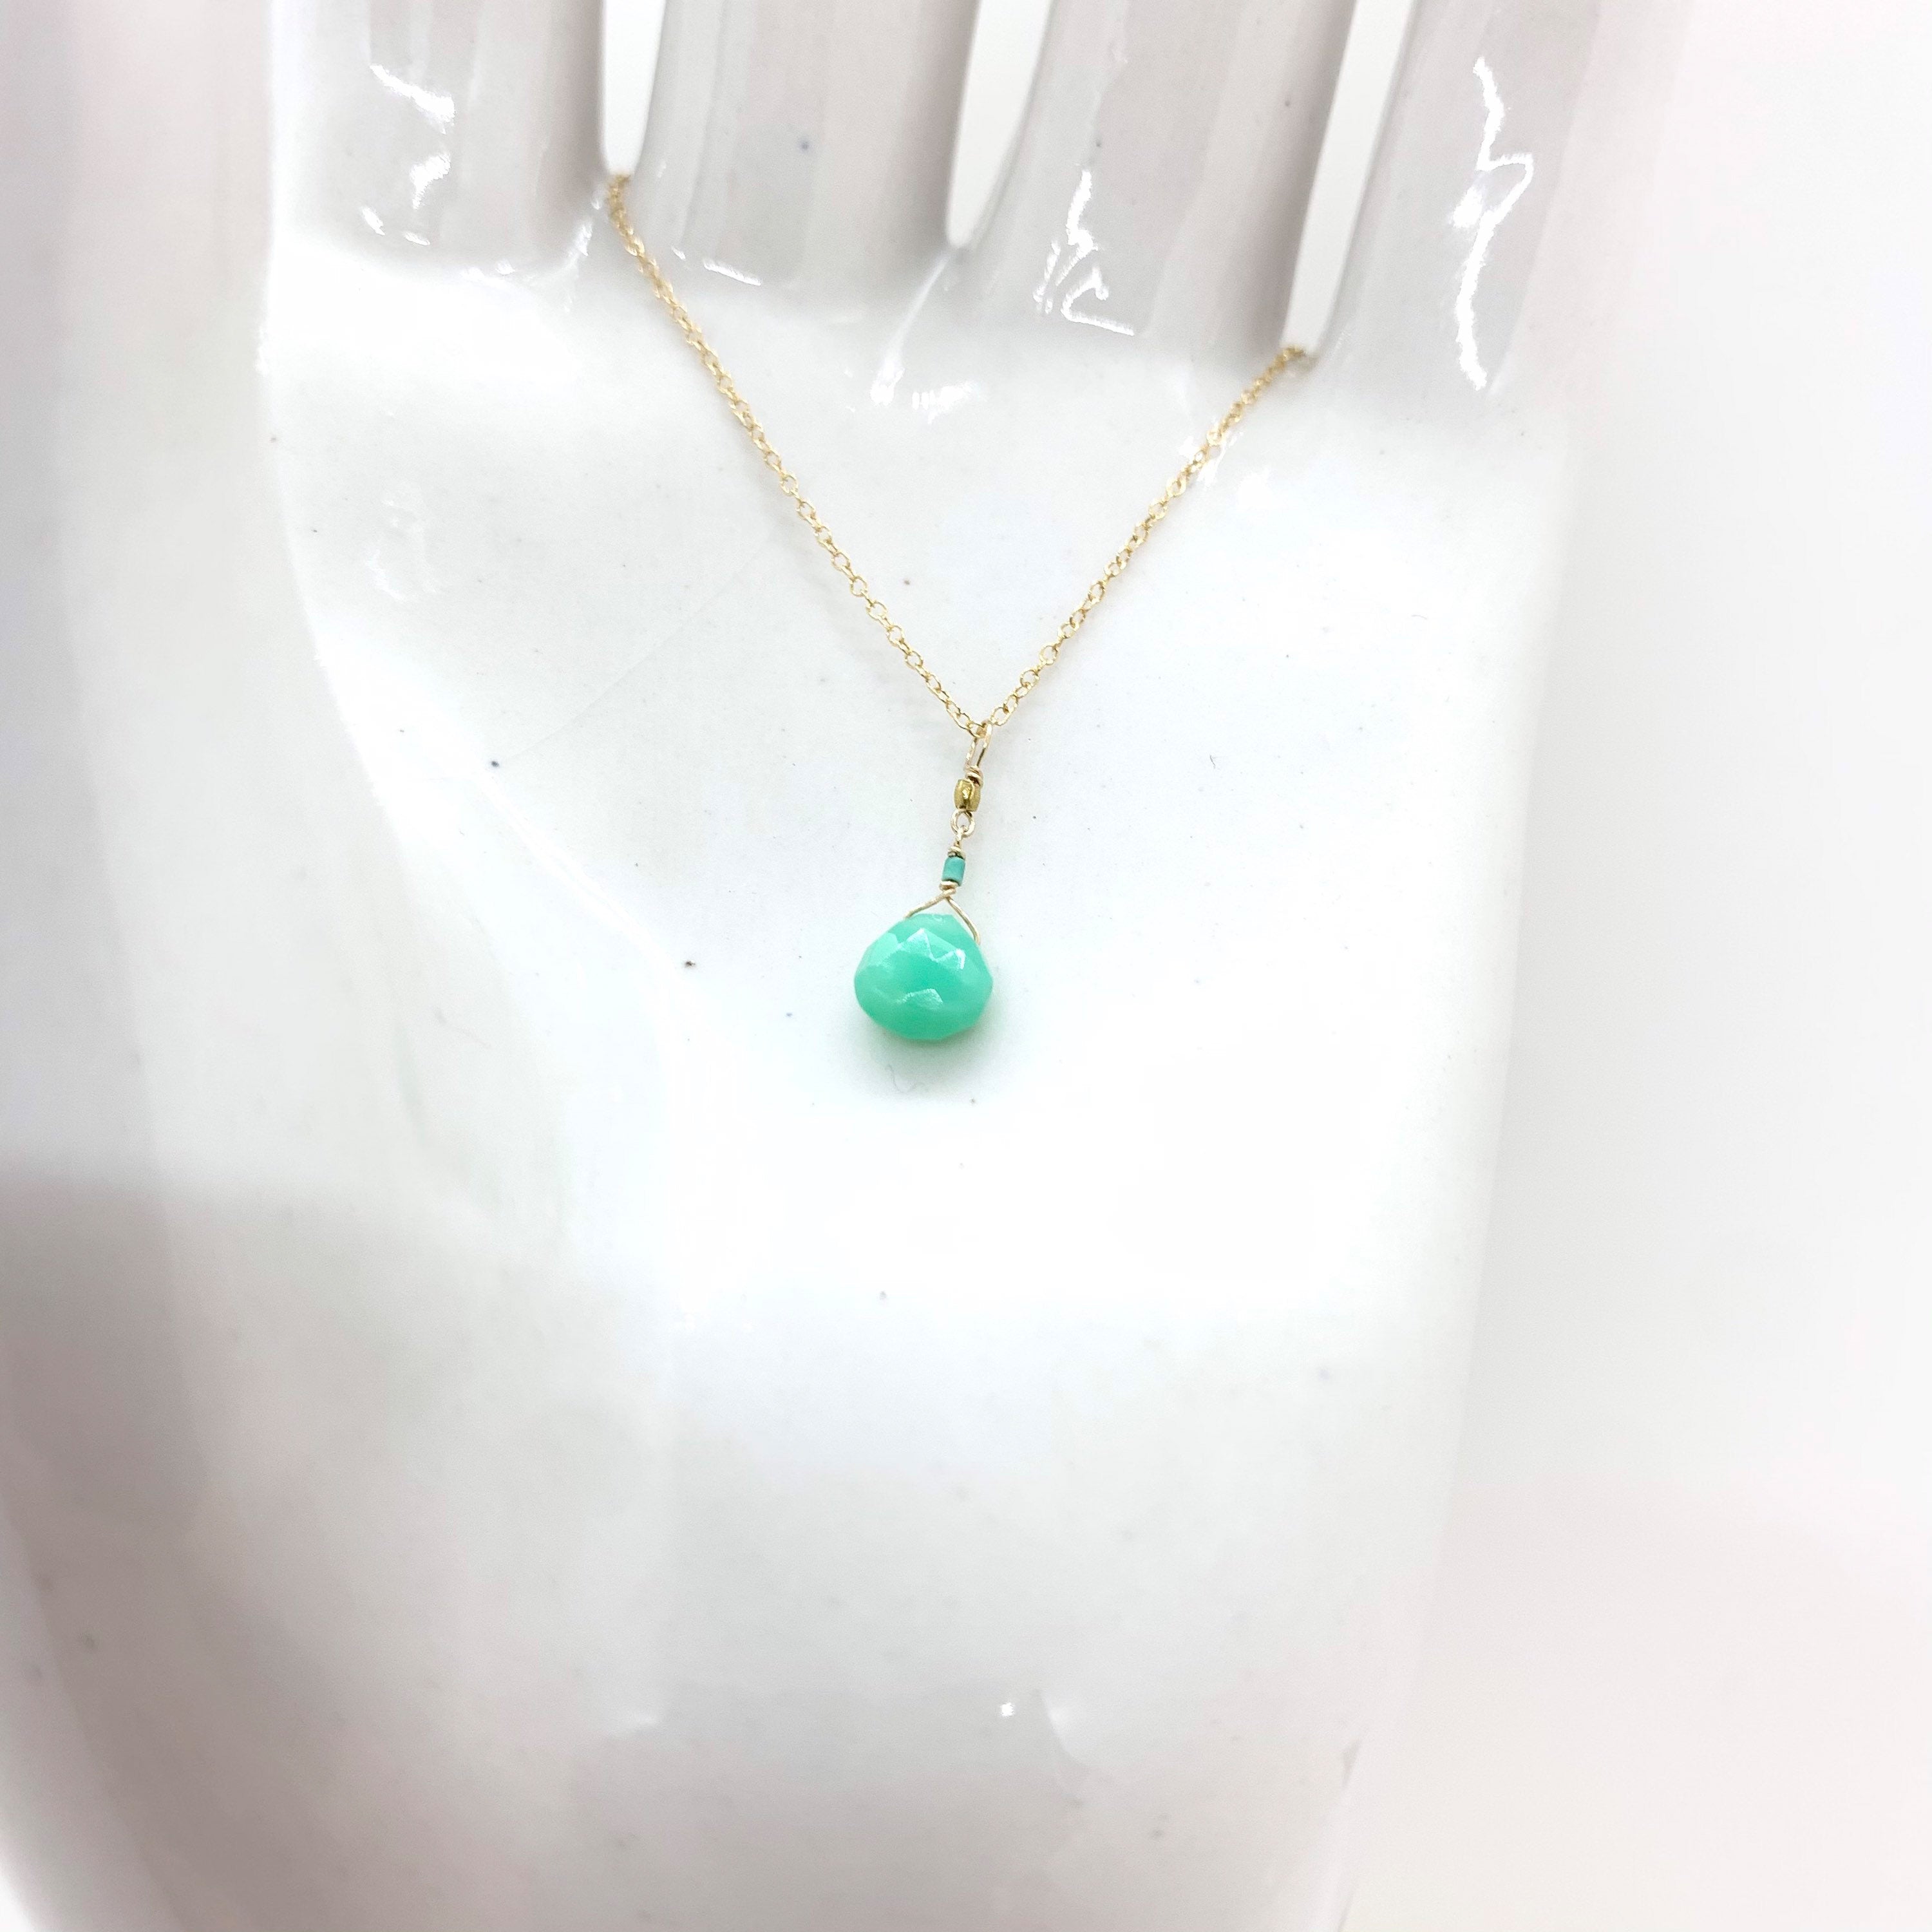 14k Gold Chain Necklace w/ Chrysoprase, Turquoise & 18k Gold Nugget